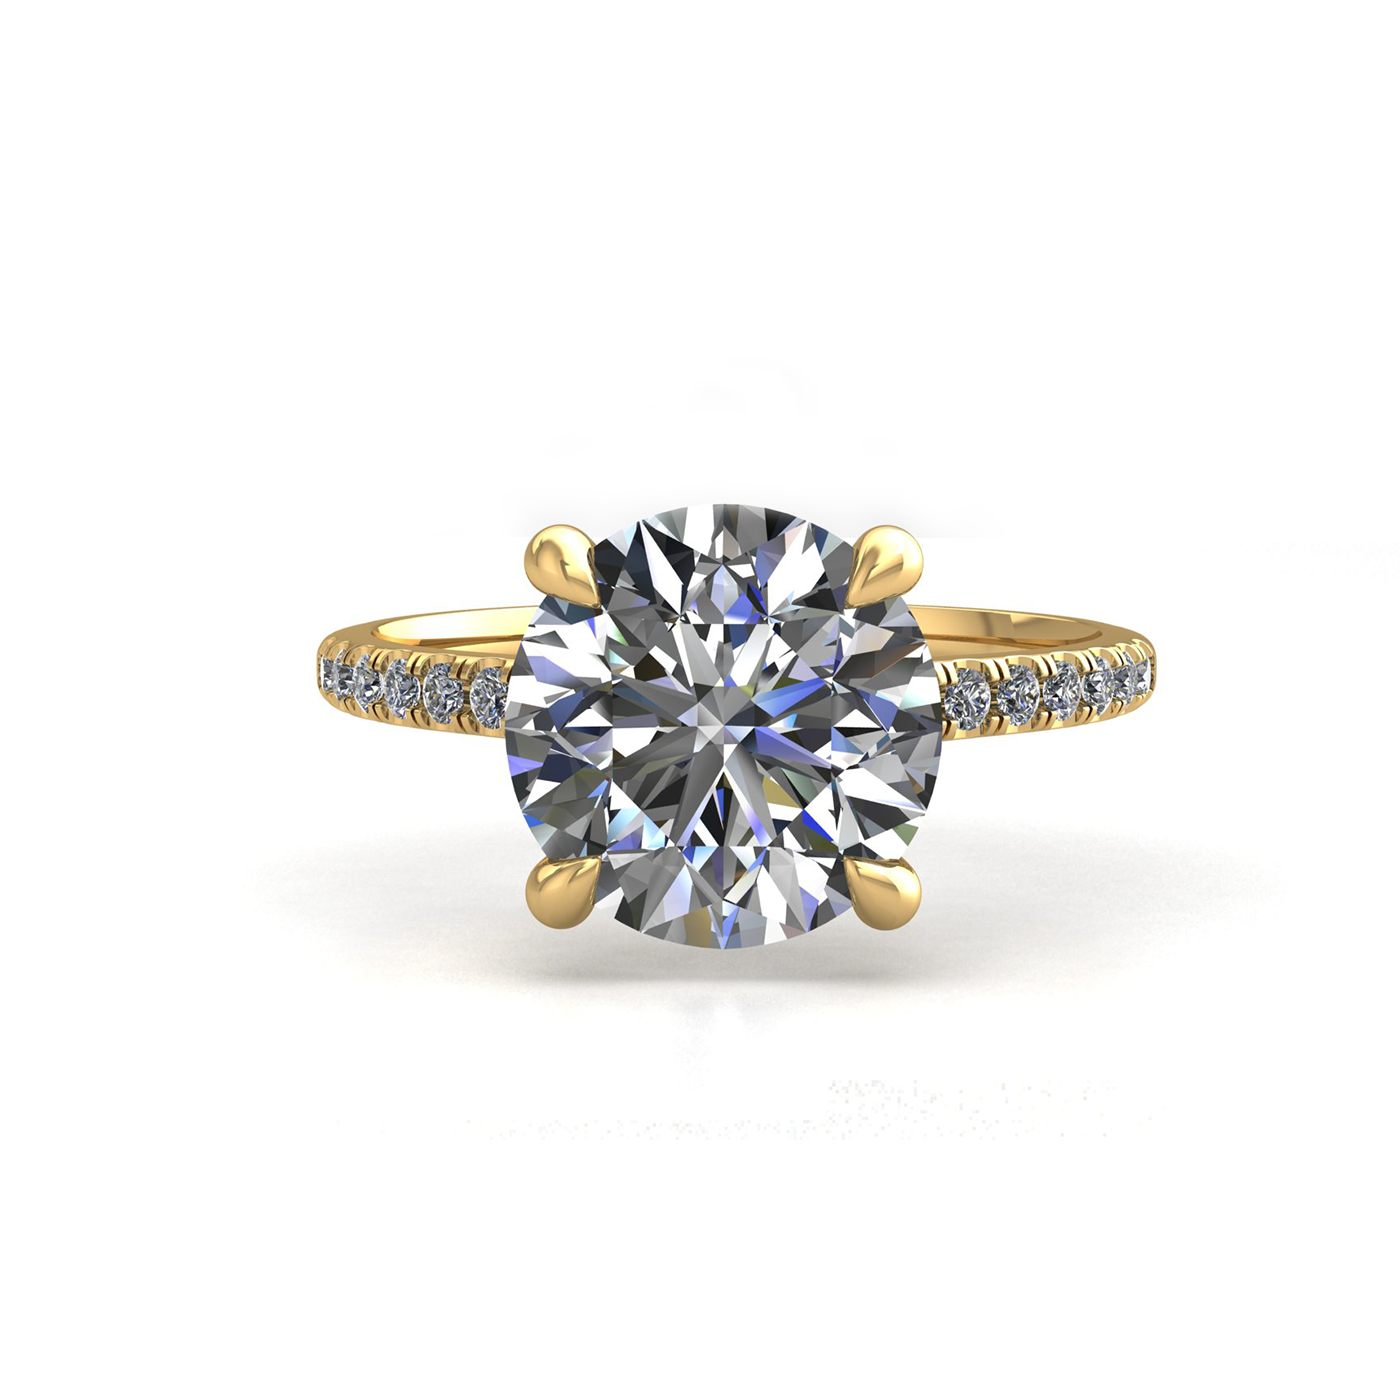 18k yellow gold  0,30 ct 4 prongs round cut diamond engagement ring with whisper thin pavÉ set band Photos & images